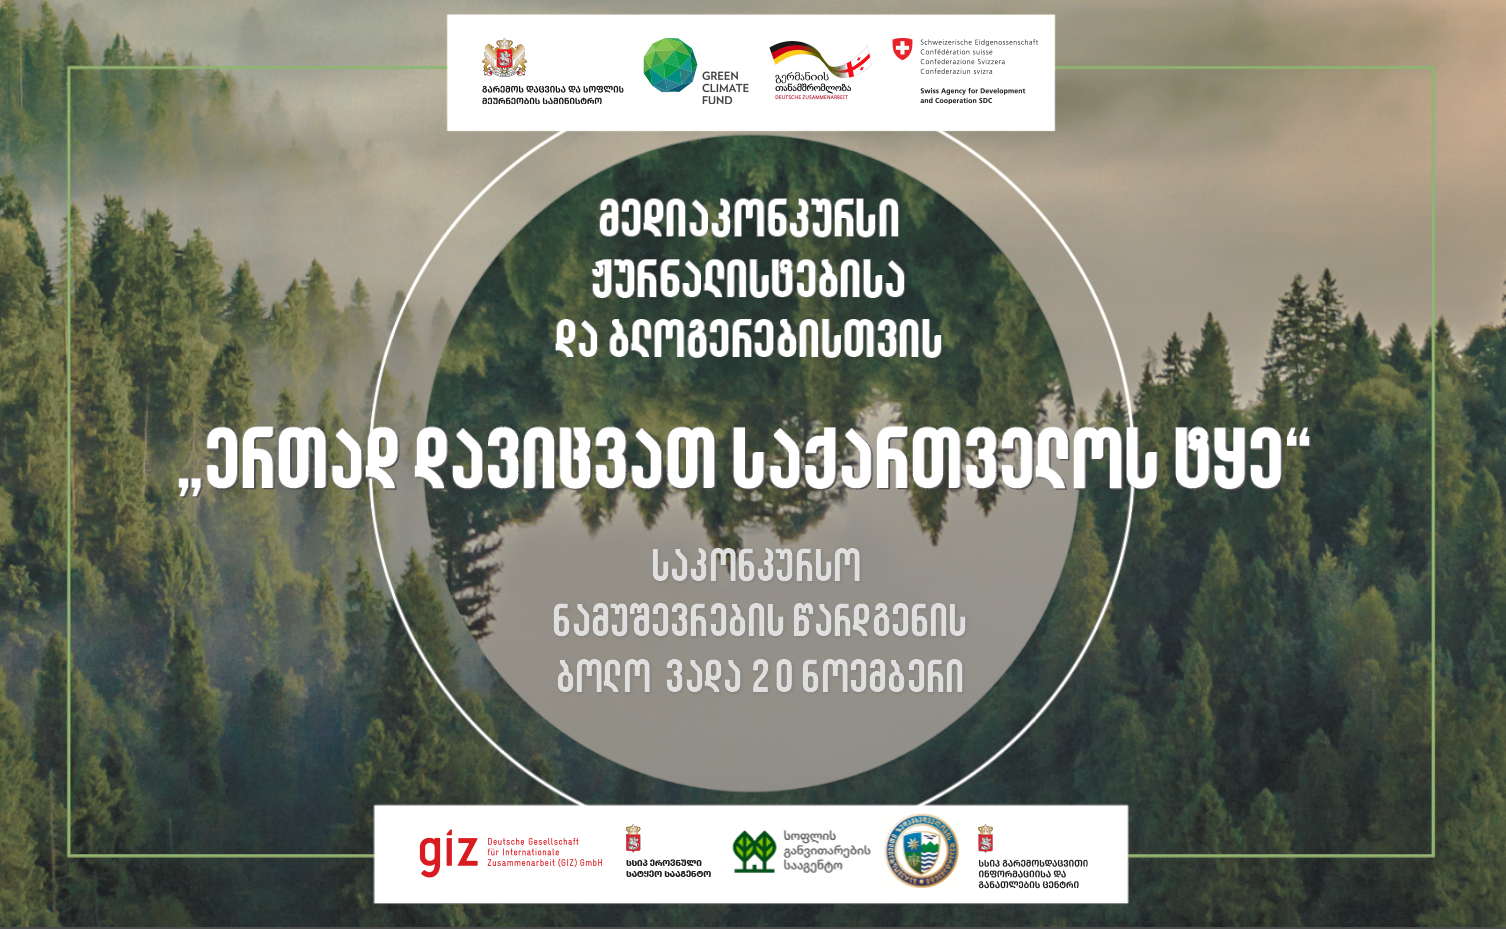 "Let's protect Georgian forests together" is a media contest open to bloggers and journalists.